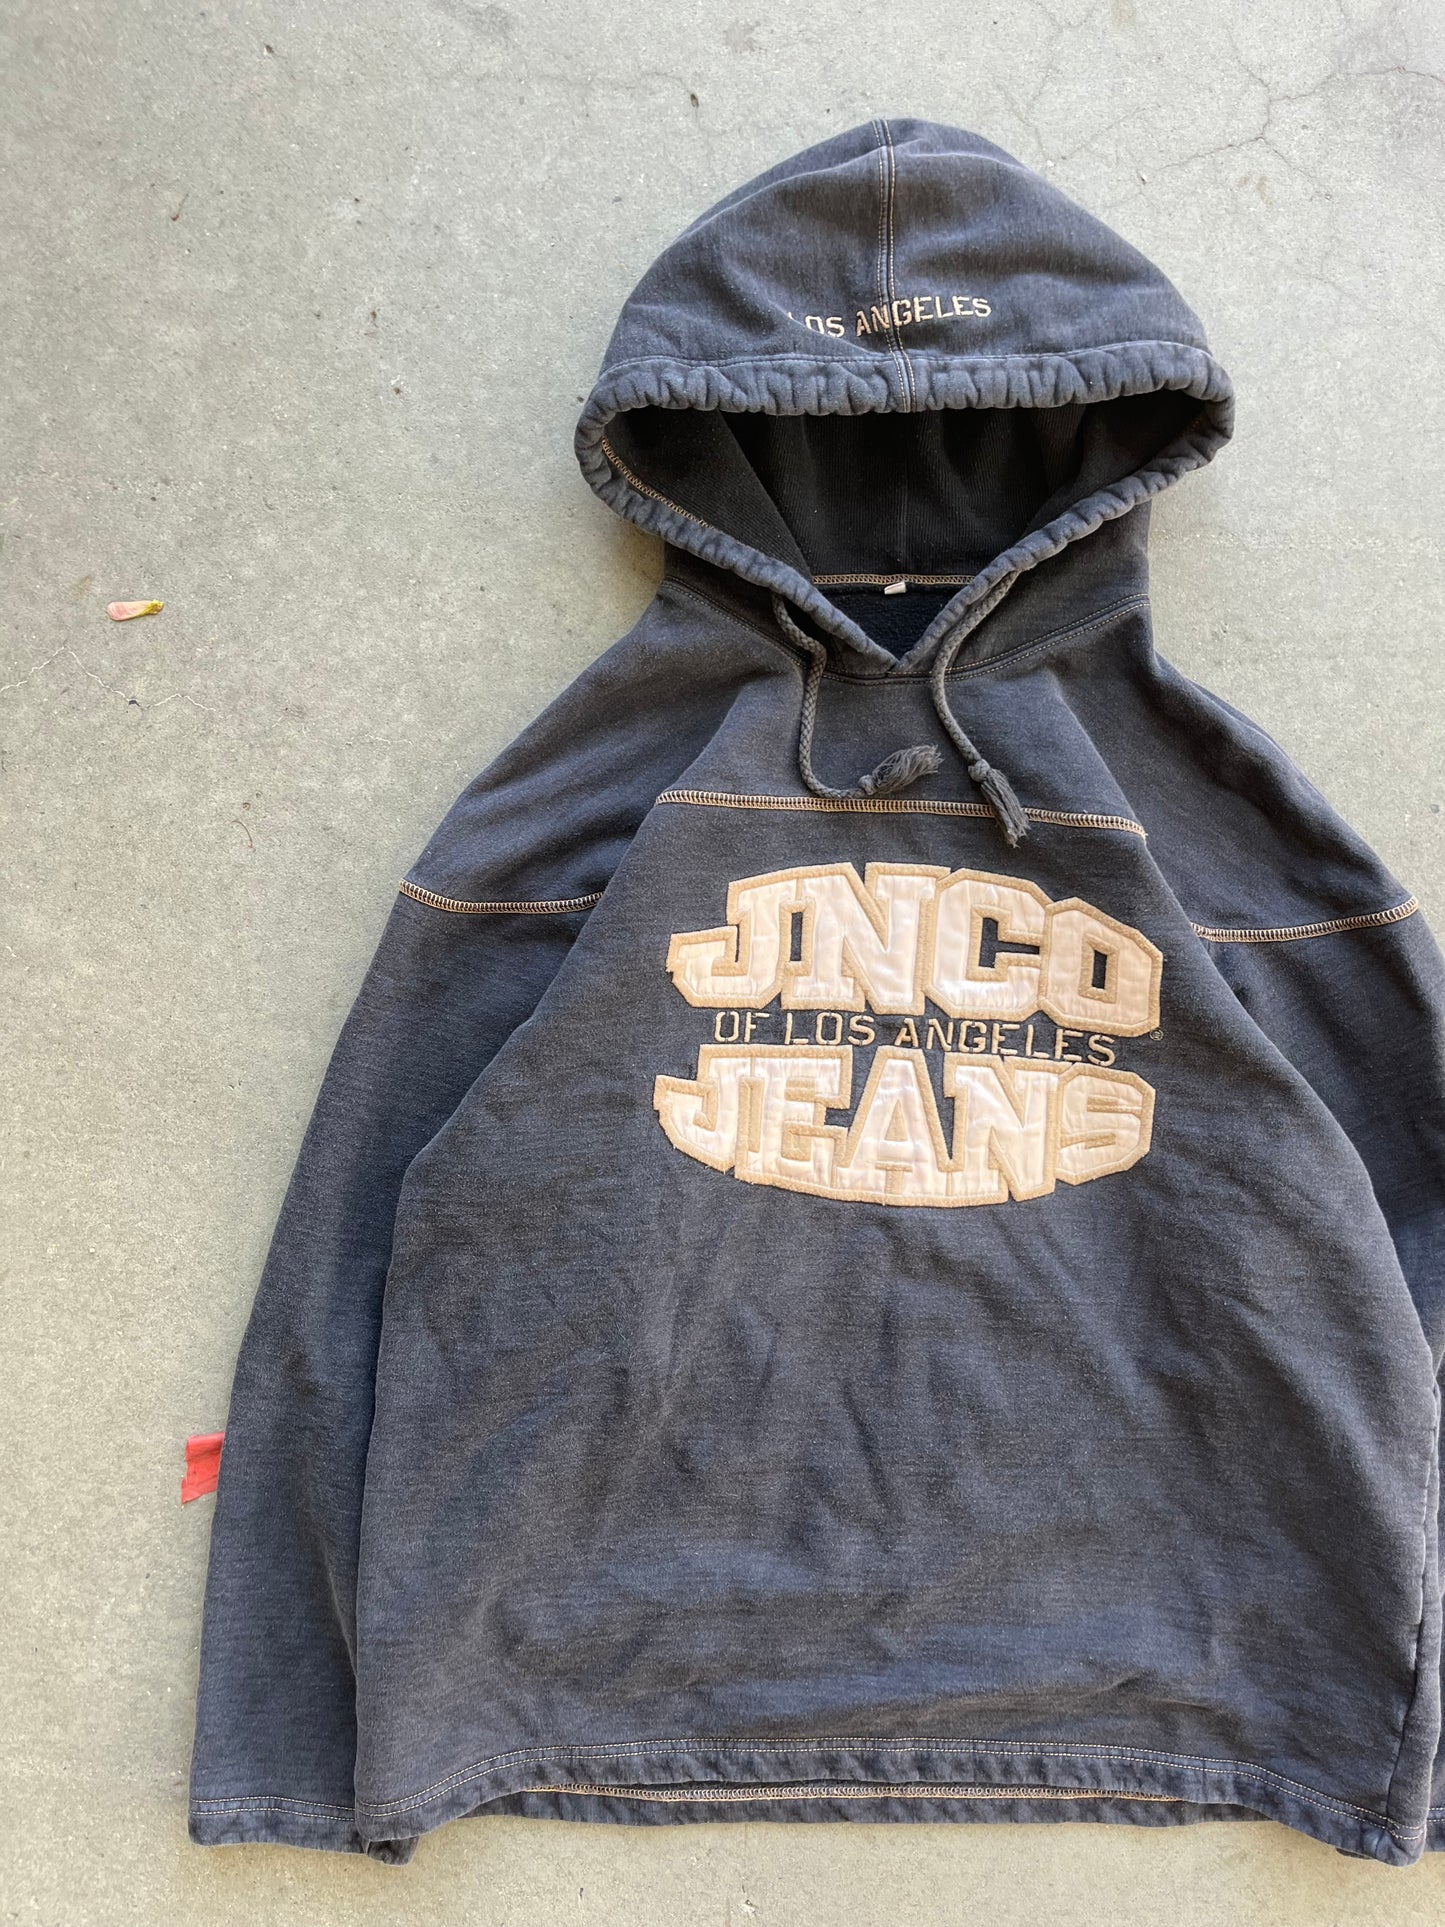 90s JNCO Jeans Hoodie Made in USA